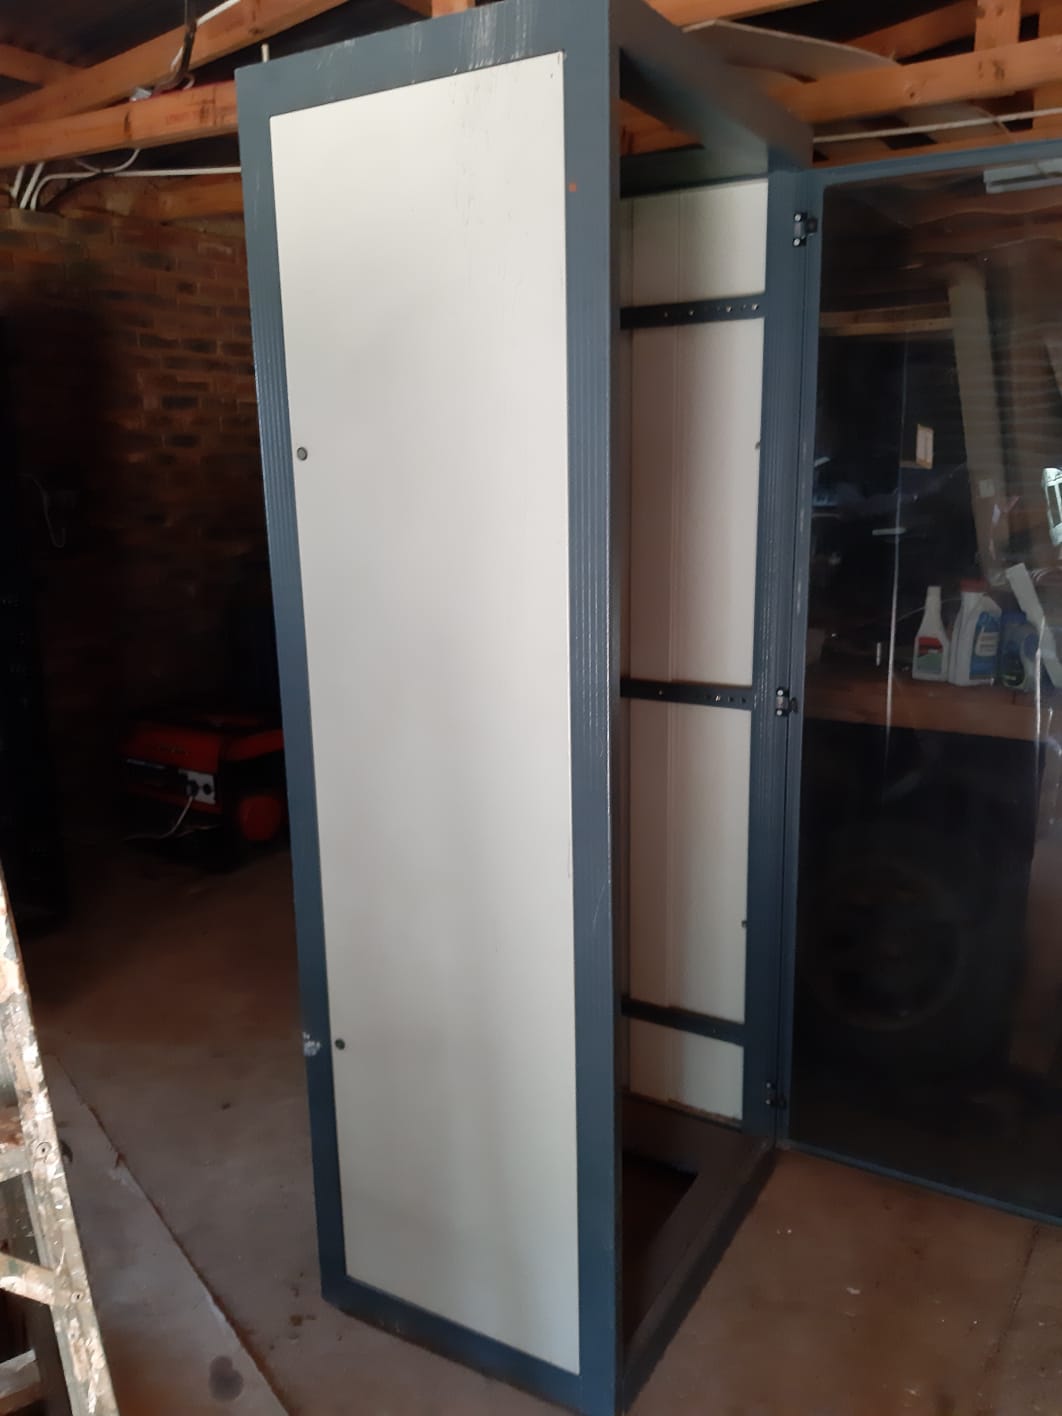 2 meter high steel cabinet. Can be used as a biltongmaker / lockable cabinet